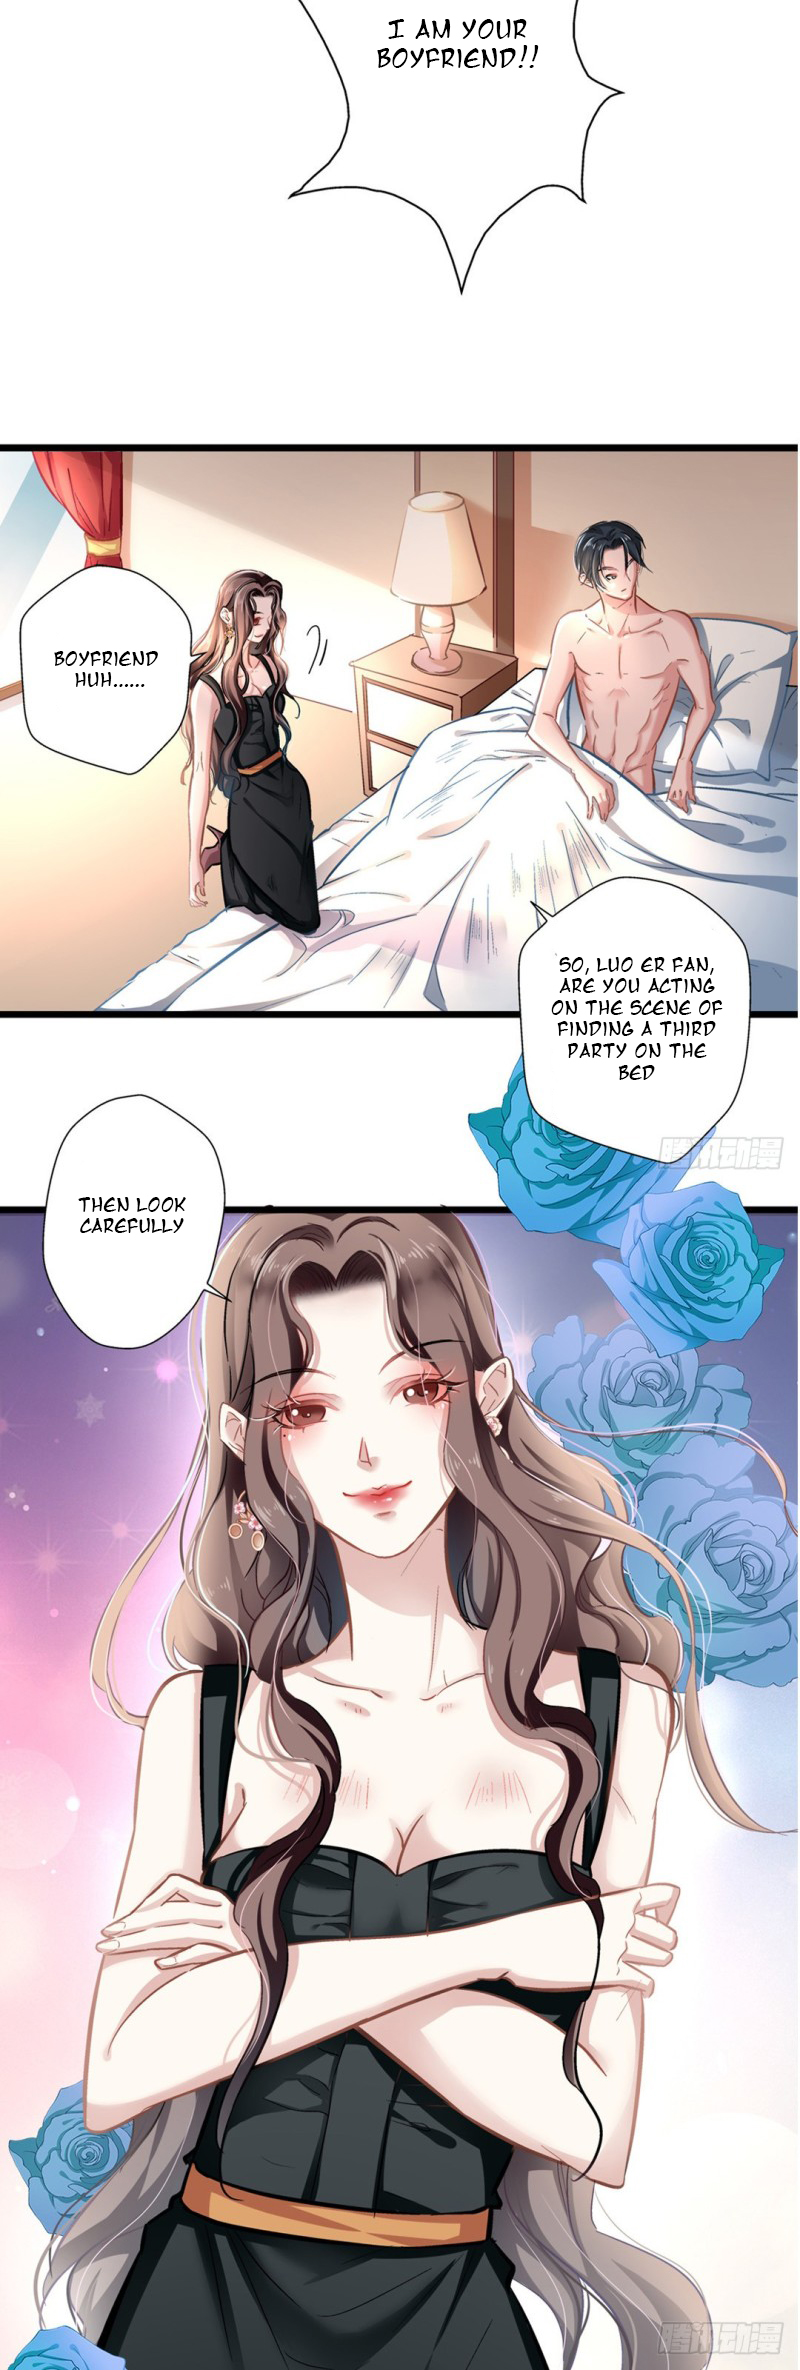 LOVABLE AND DARK WIFE Ch. 1